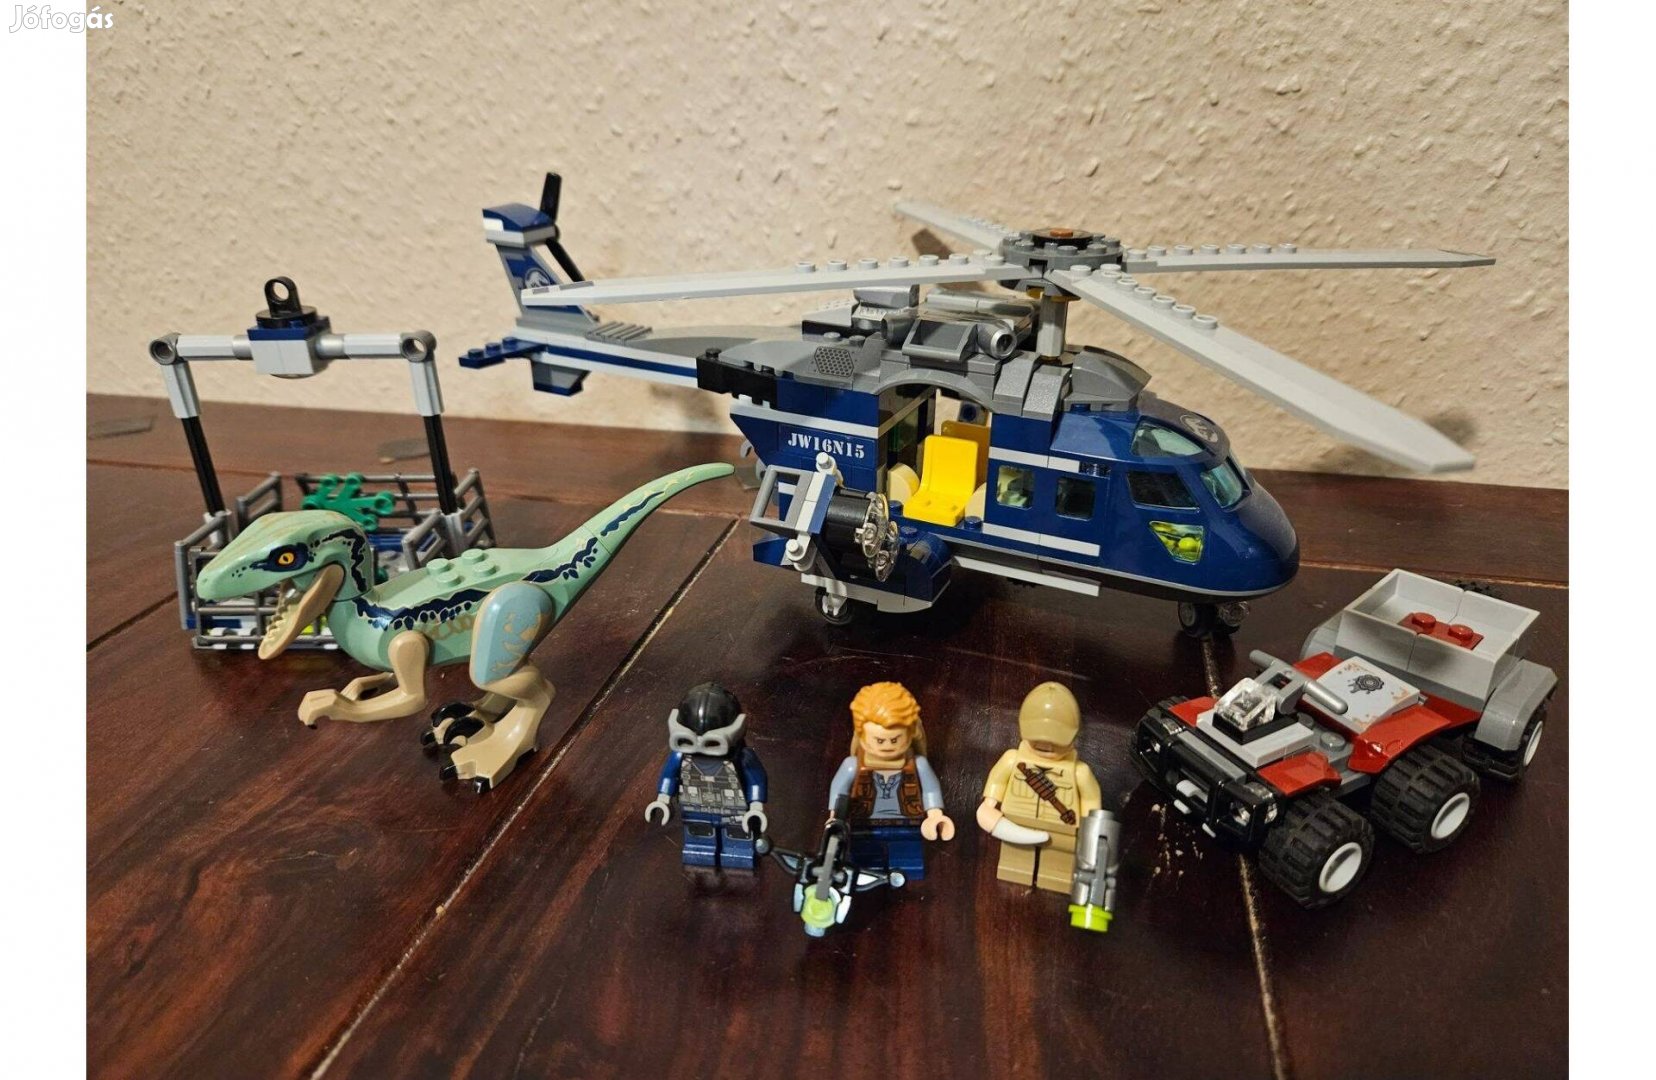 LEGO Jurassic World - 75928 - Blue's Helicopter Pursuit